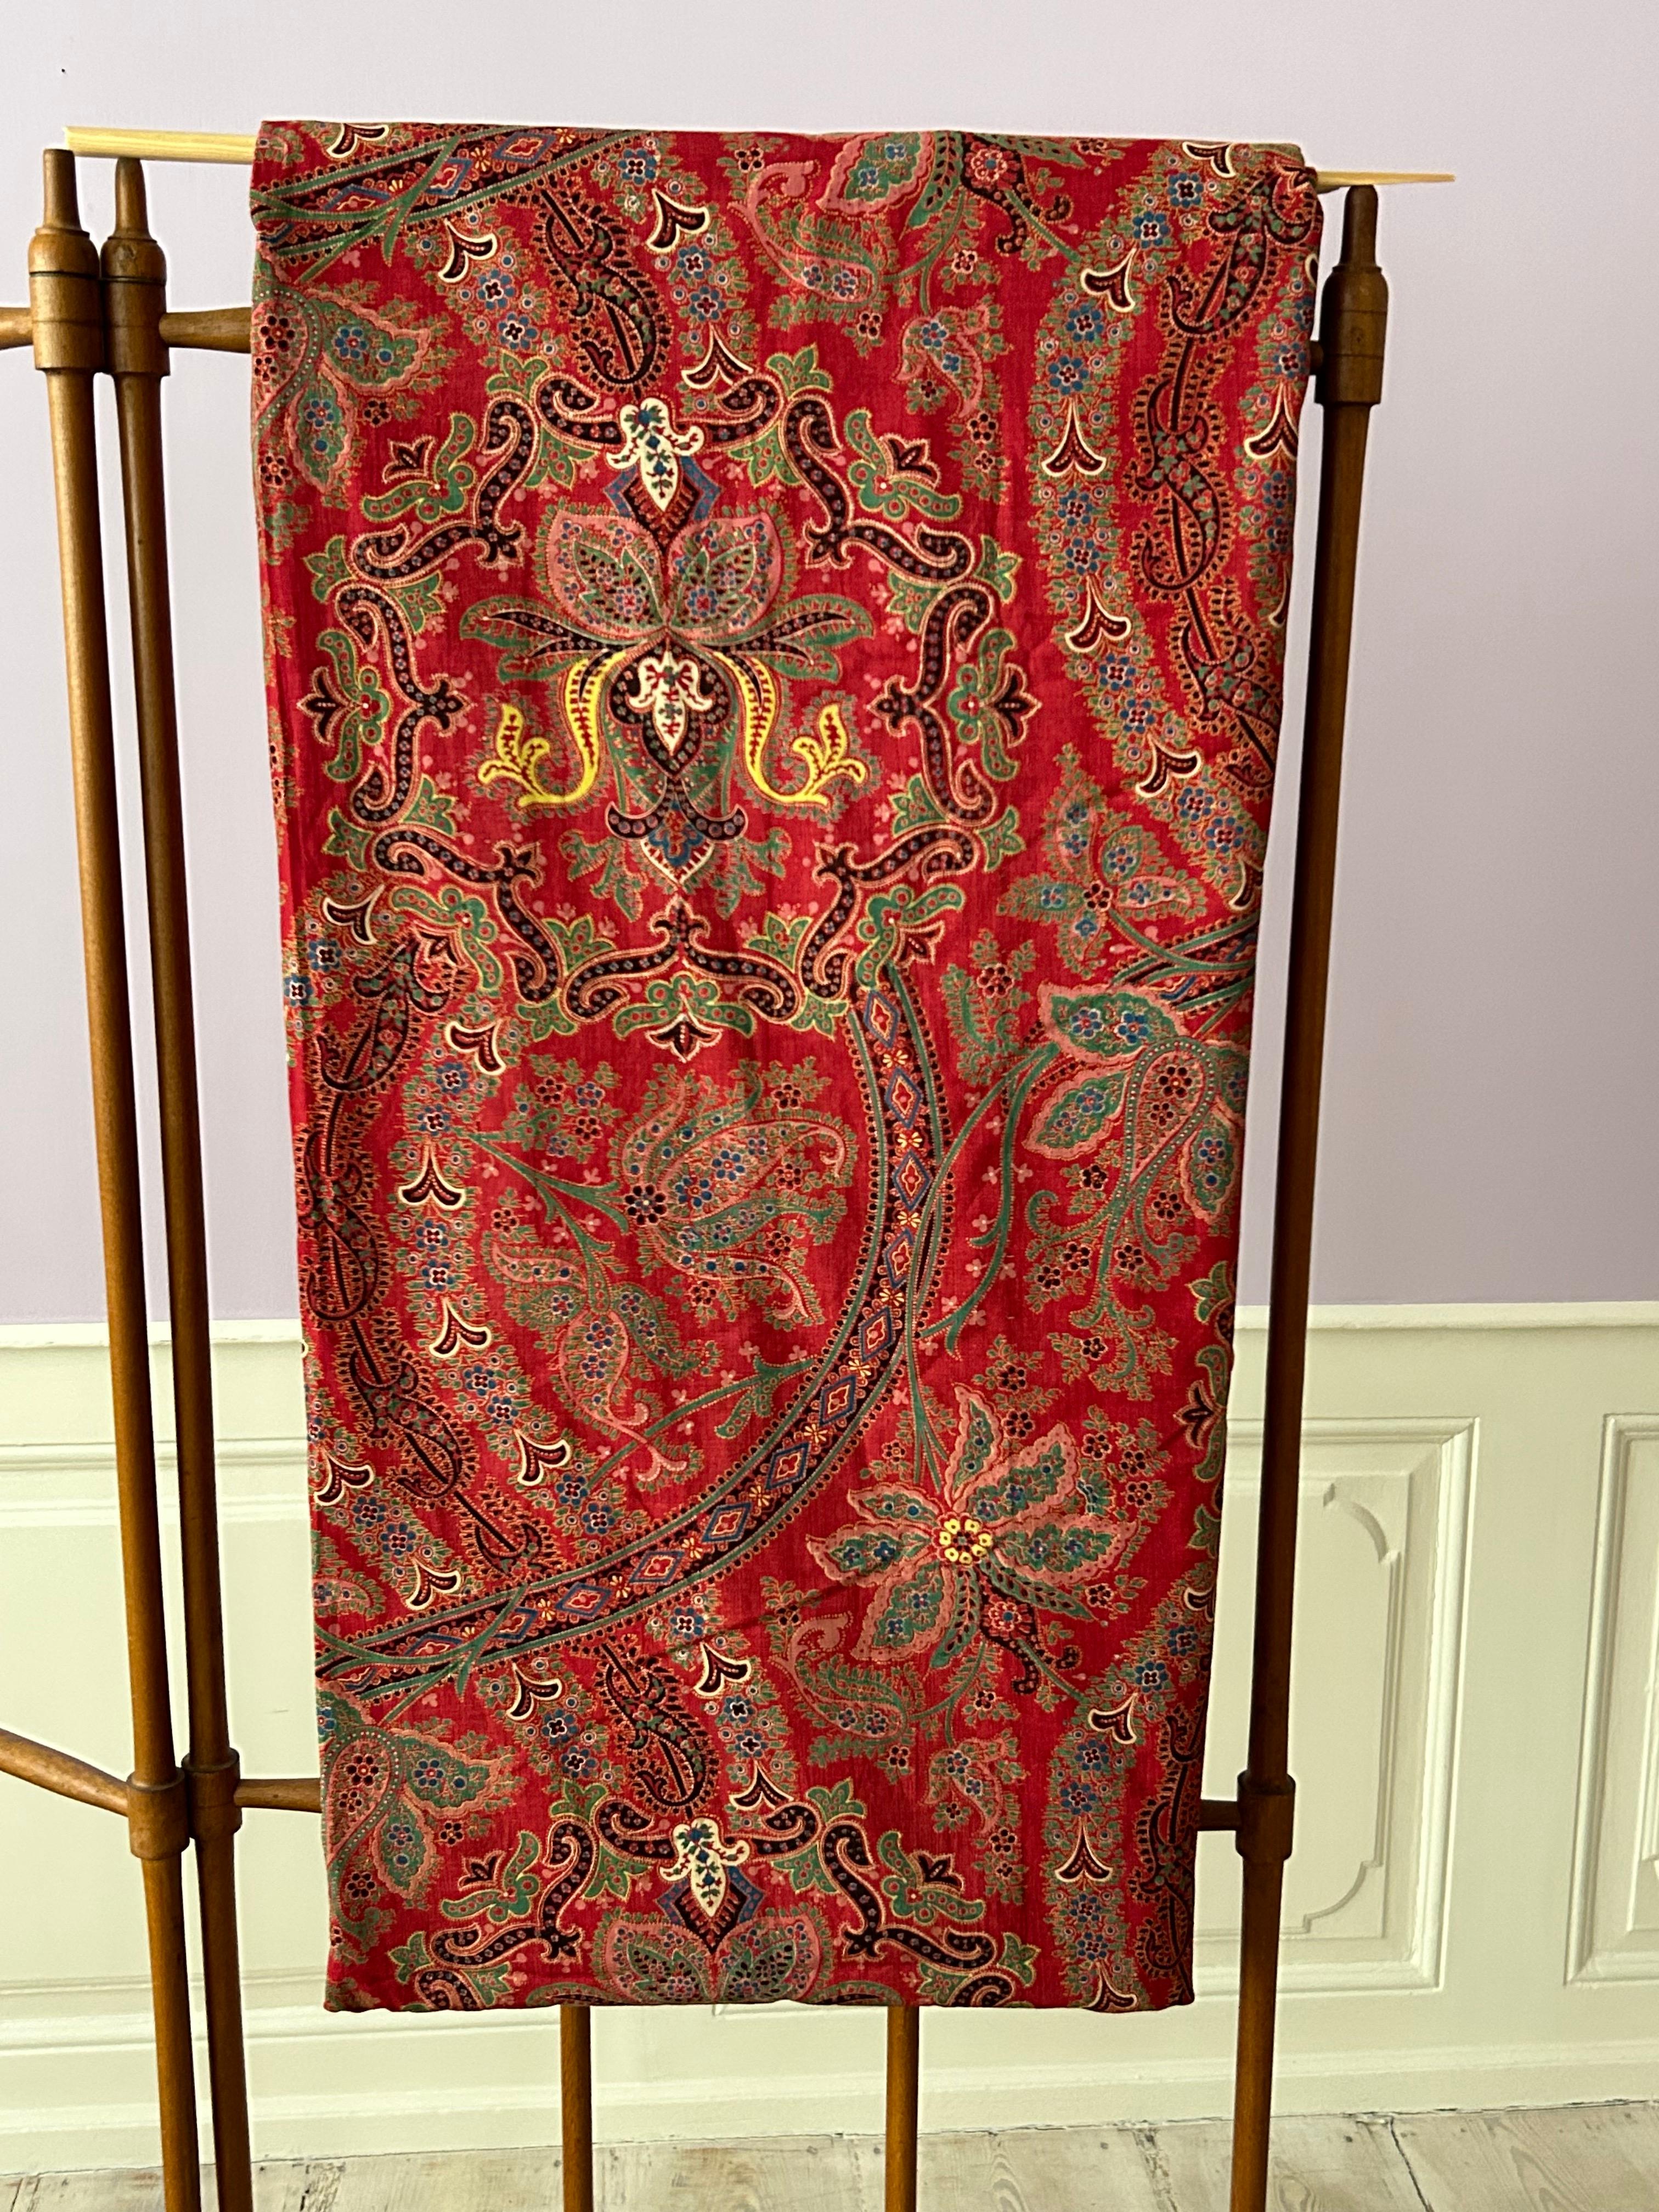 Large Antique Paisley Curtain Textile in Red with Pattern, France, 19th Century For Sale 3